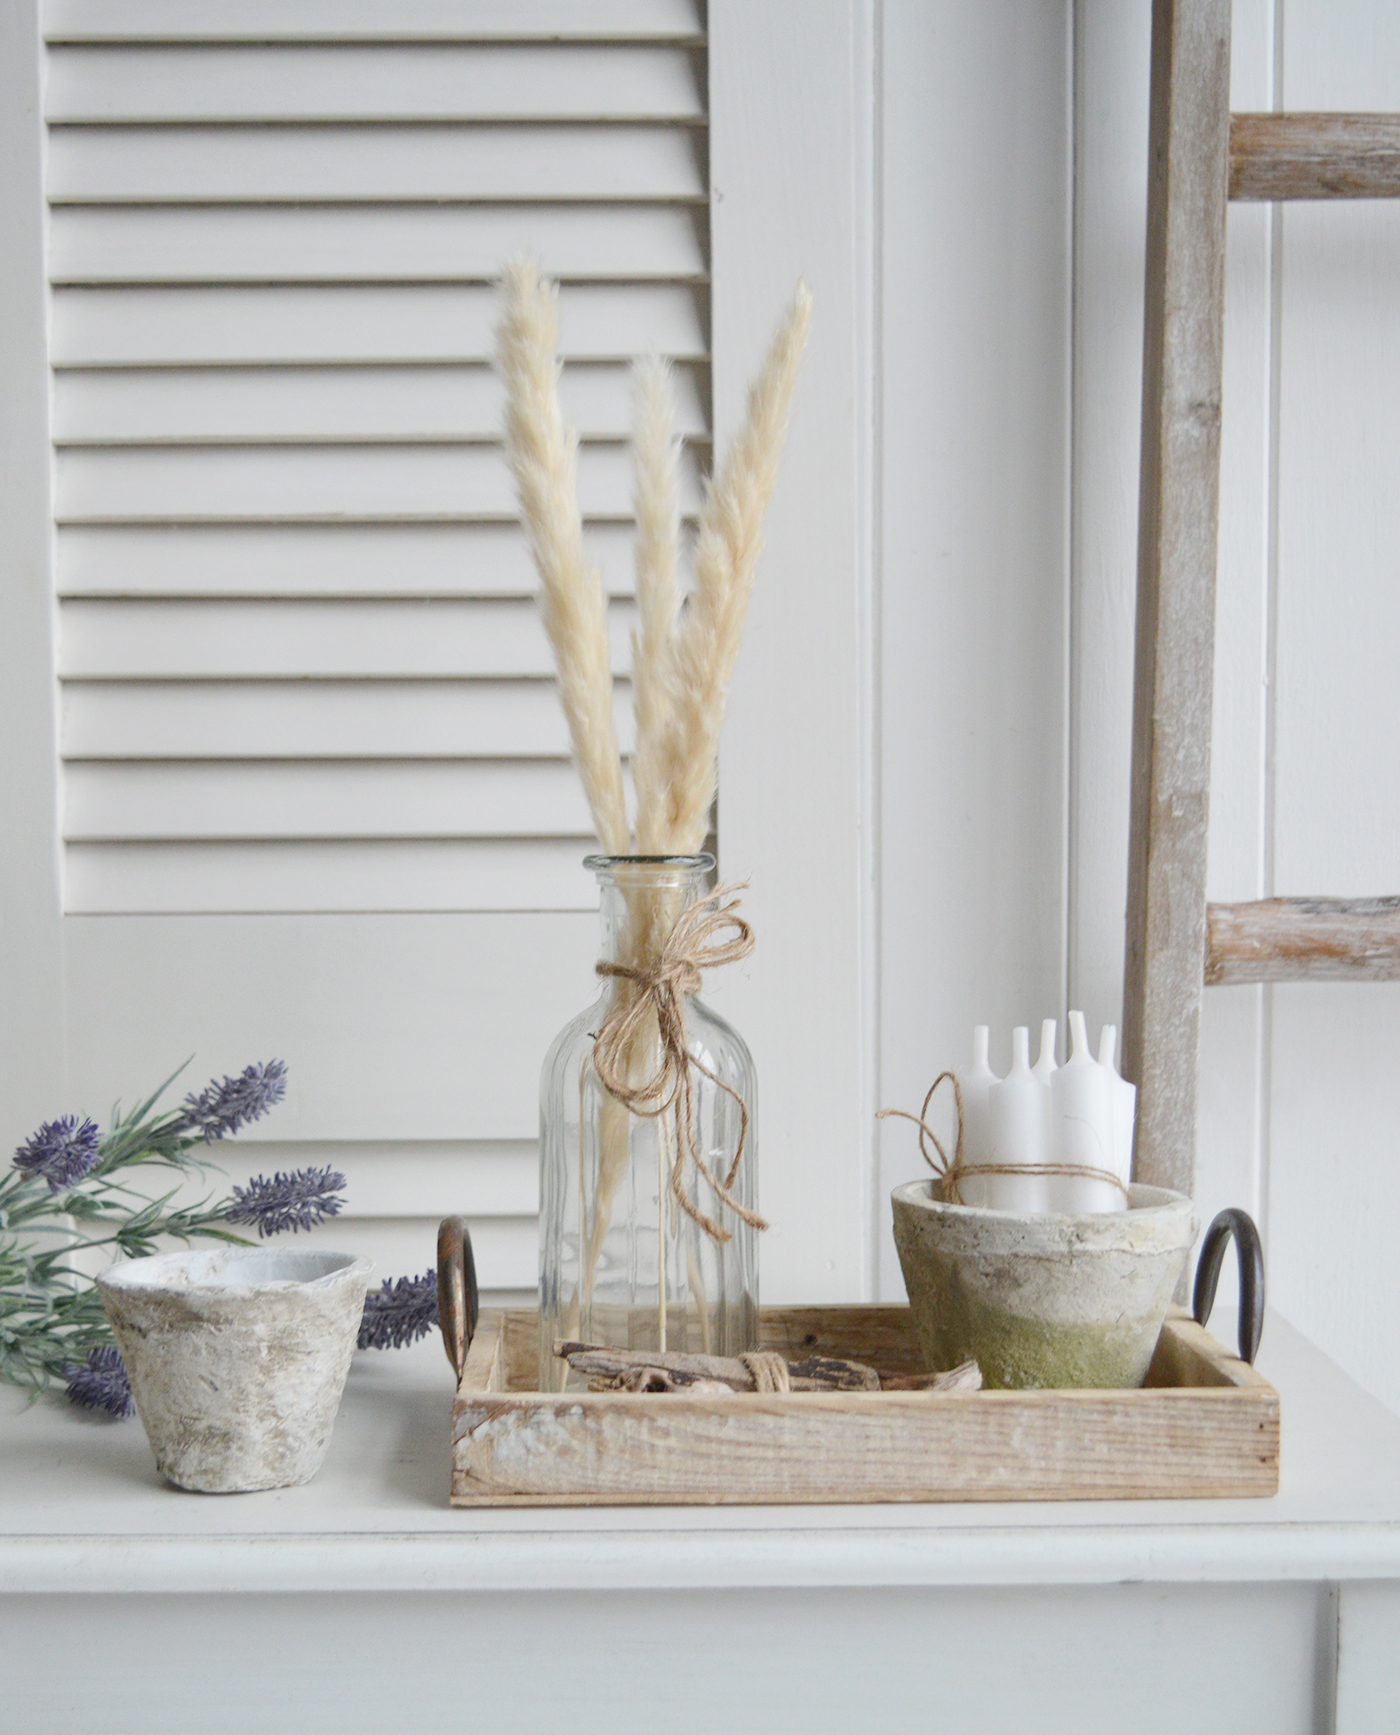 White antiqued-terracotta pots for rustic styling to your New England country home